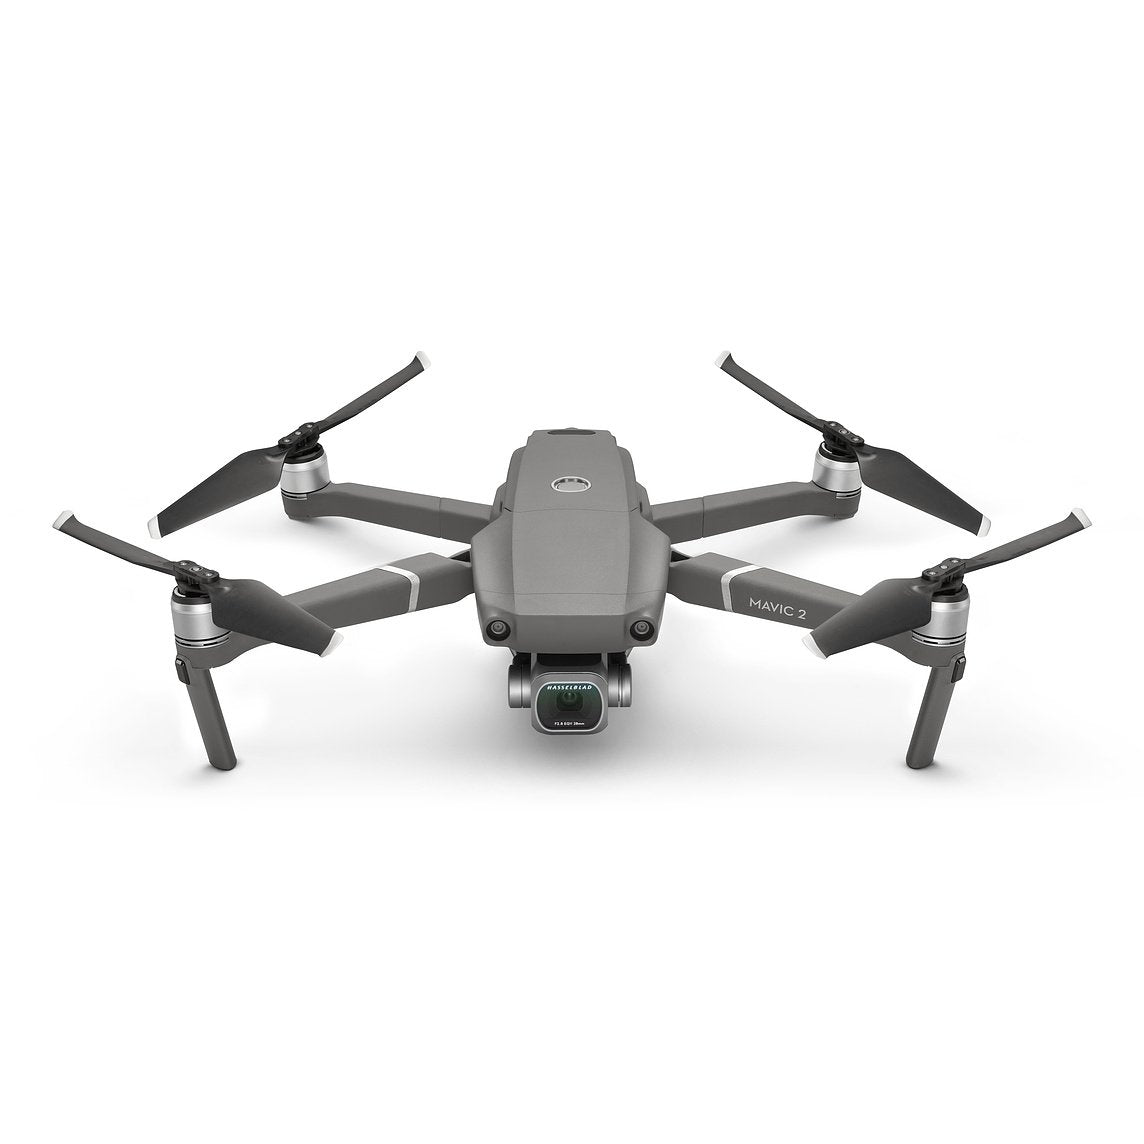 DJI Mavic 2 Pro 'World's First Drone with Integrated Hasselblad Camera